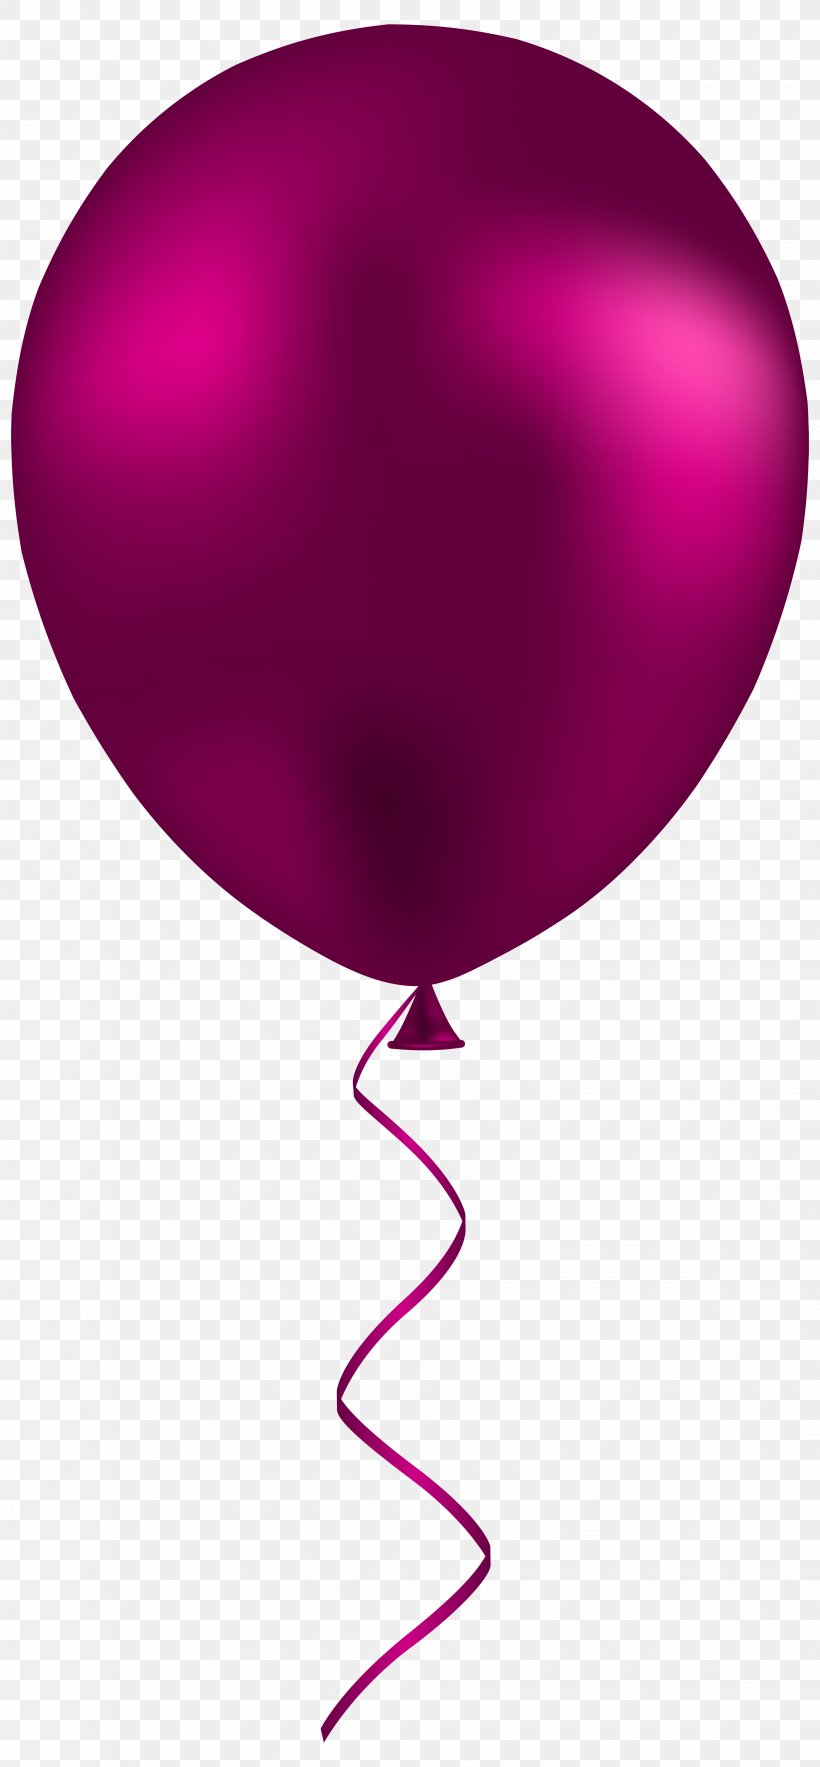 Balloon Pink Red Clip Art, PNG, 3711x8000px, Balloon, Blue, Hot Air Balloon, Magenta, Pink Download Free